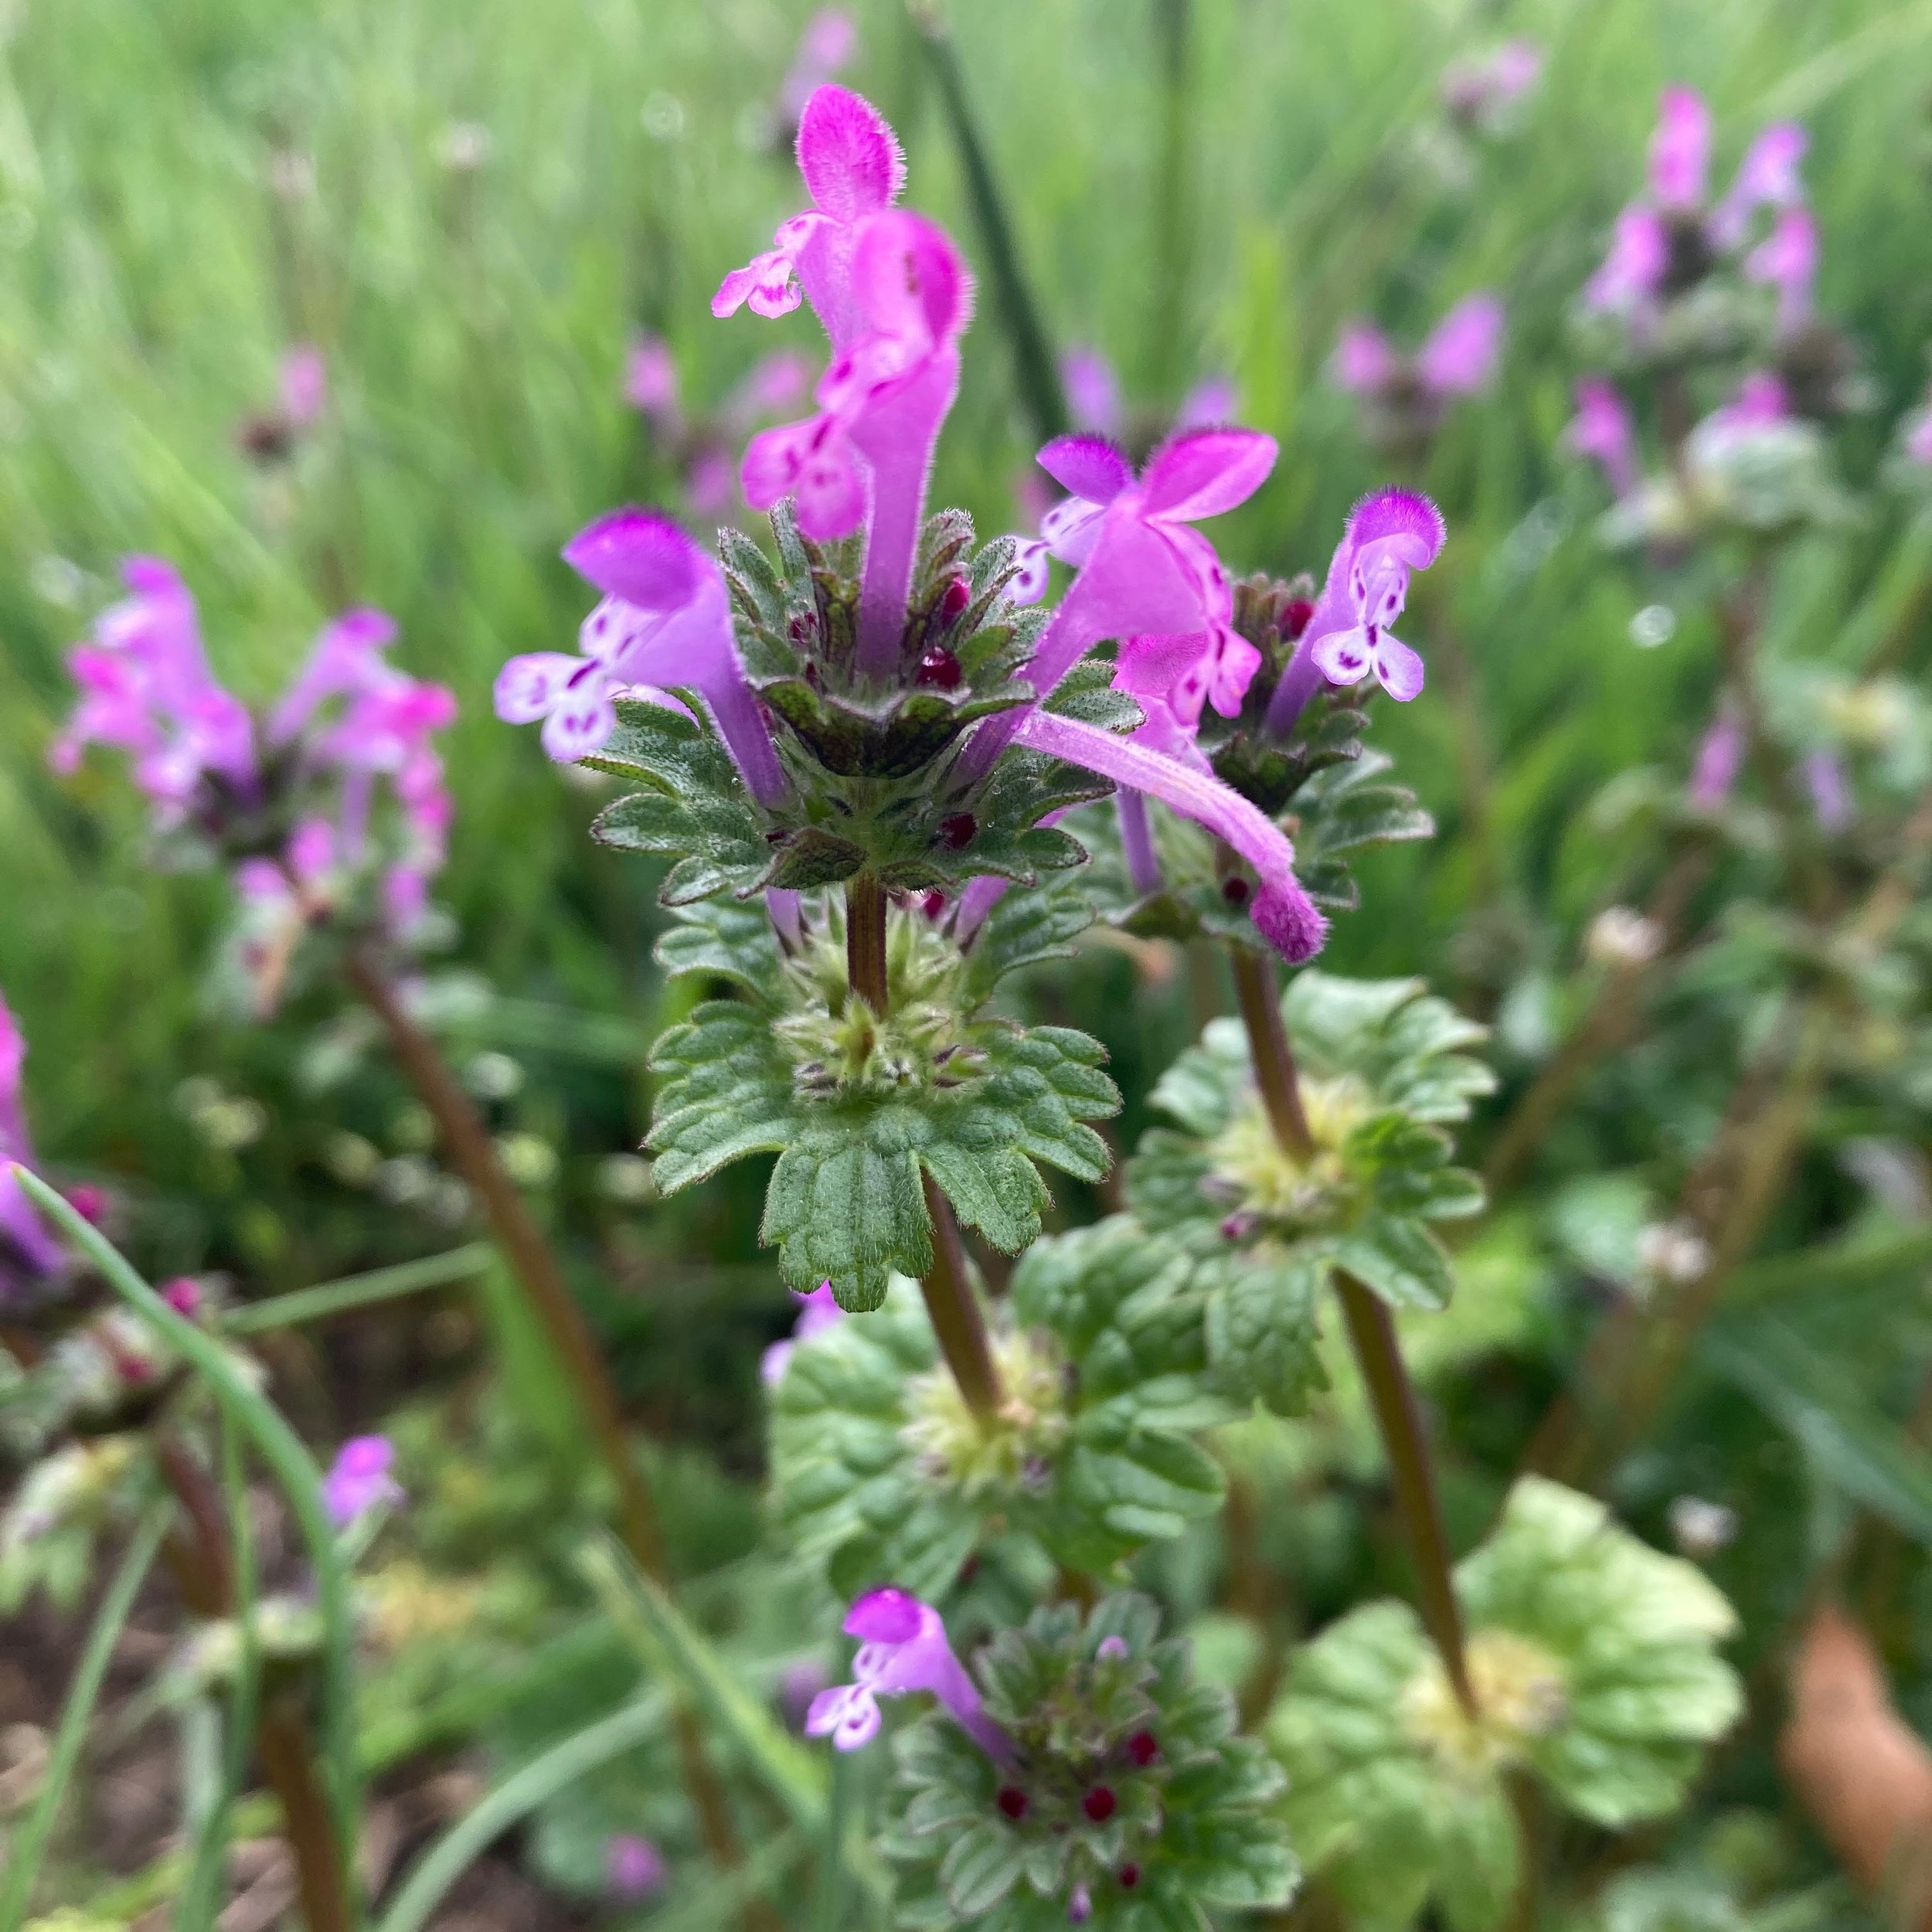 This henbit has Aries vibes! If you want to work with the new moon and total eclipse in Aries, join me tonight for the first in a series of twelve new moon gatherings. 
.
4-5:30pm PST. Go to www.evolutionaryhuman.com for more info. Link in bio 🌑❤️
.